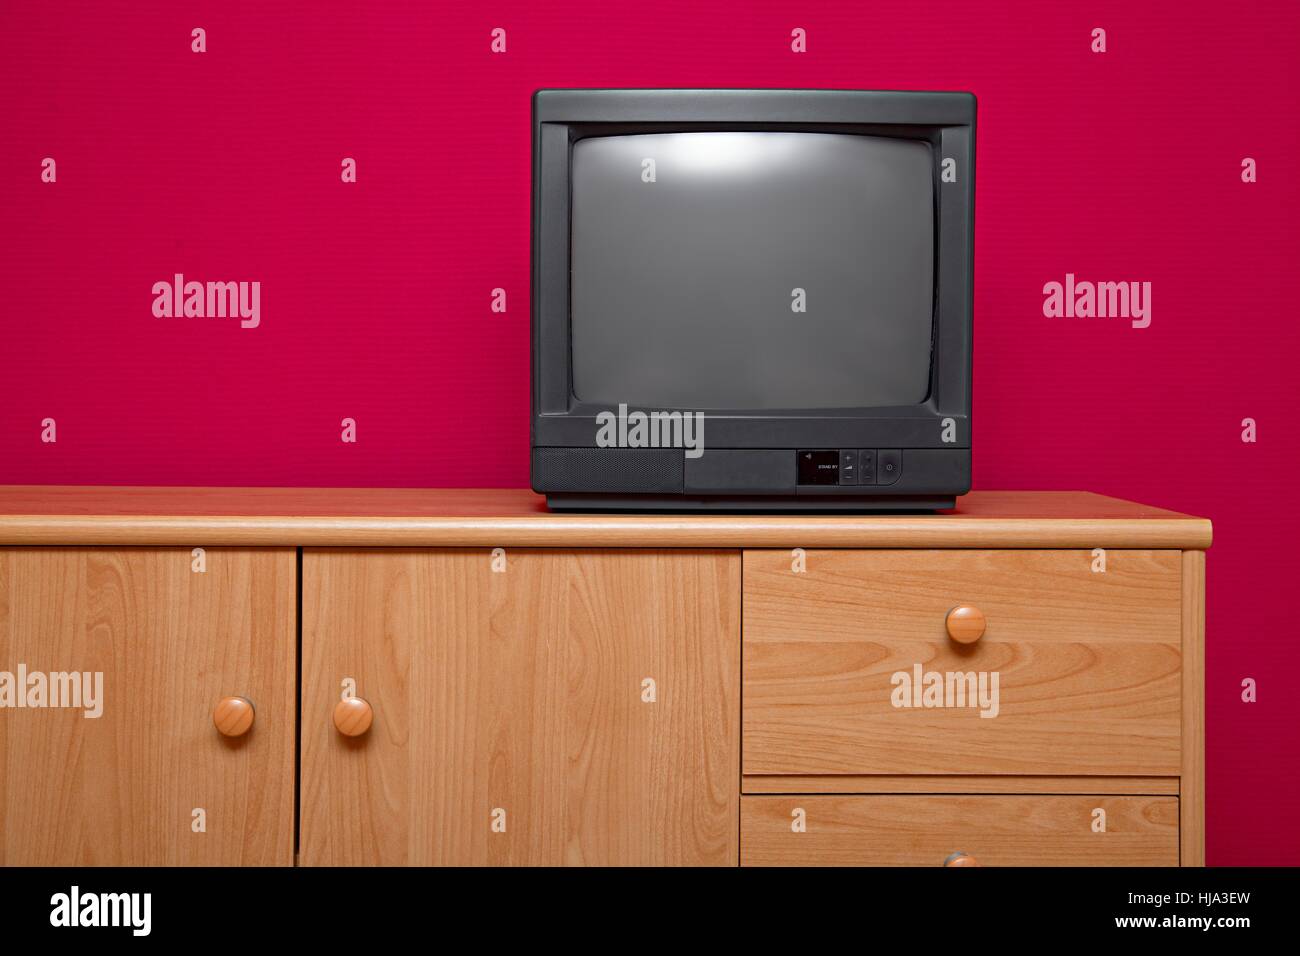 room, television, tv, televisions, set, old, red, pink, cabinet, program, Stock Photo